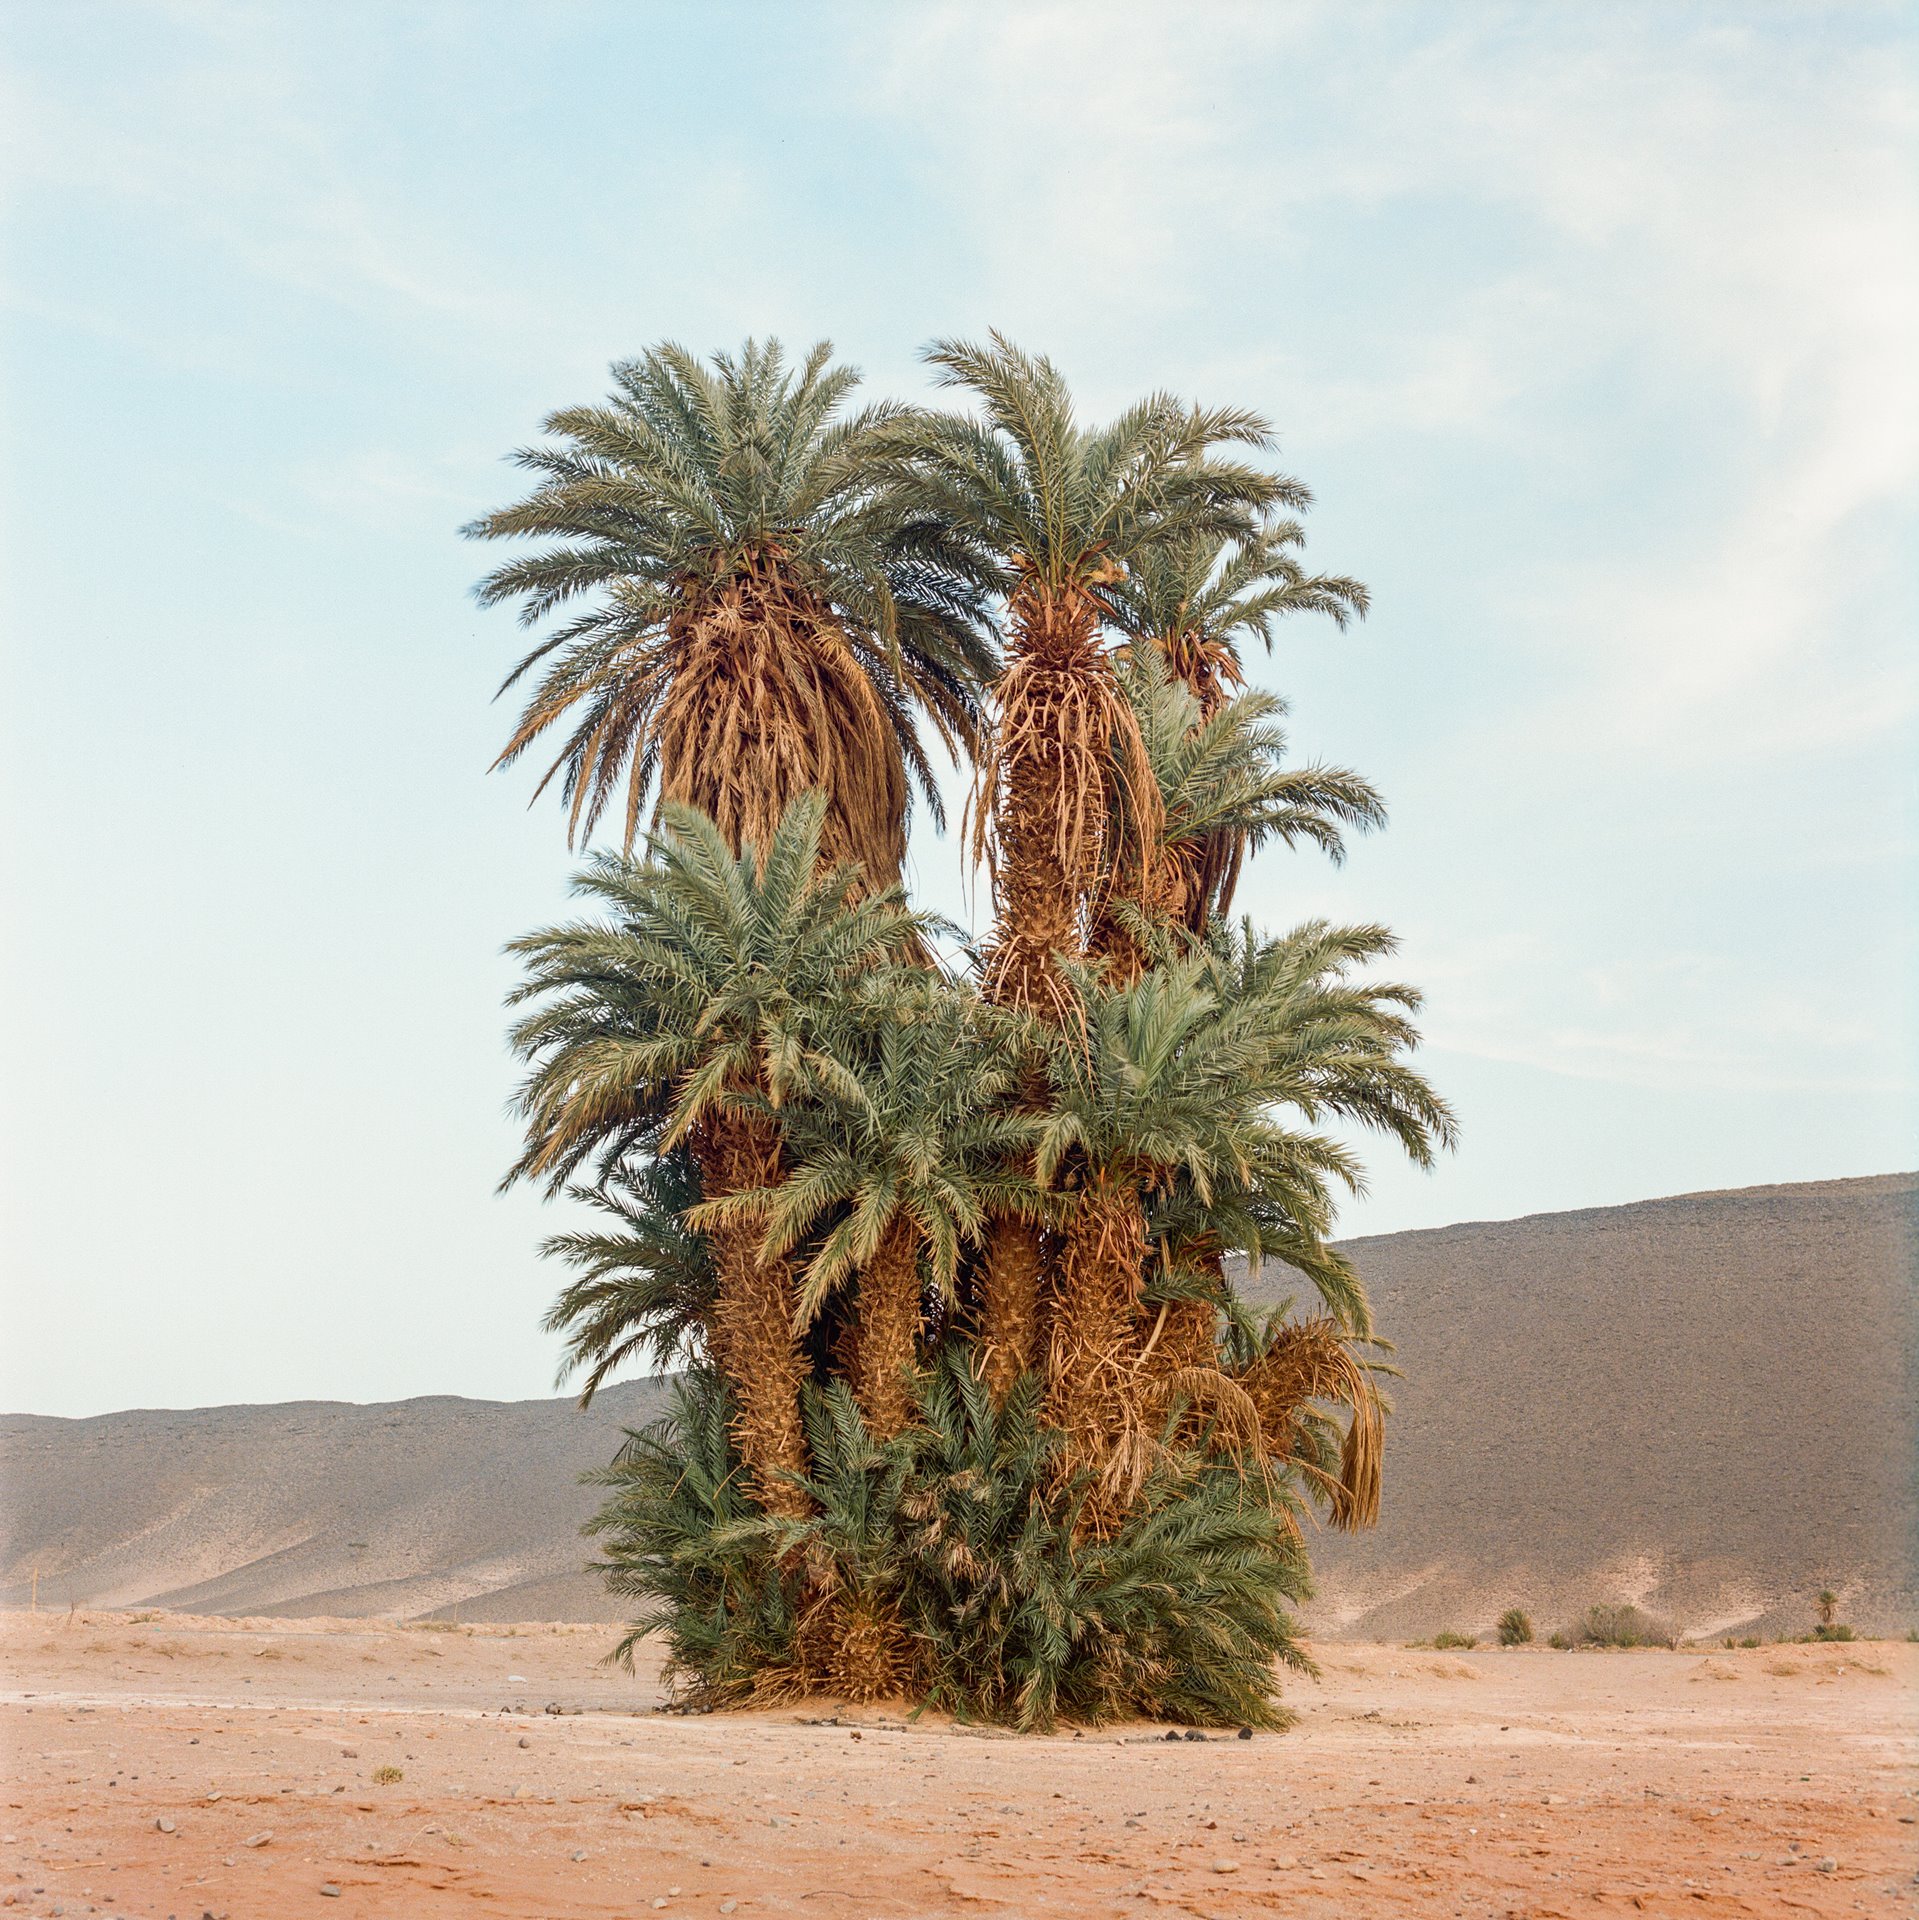 The last group of palm trees still standing in what used to be Tanseest Oasis, 15 kilometers from the town of Assa, in southern Morocco.